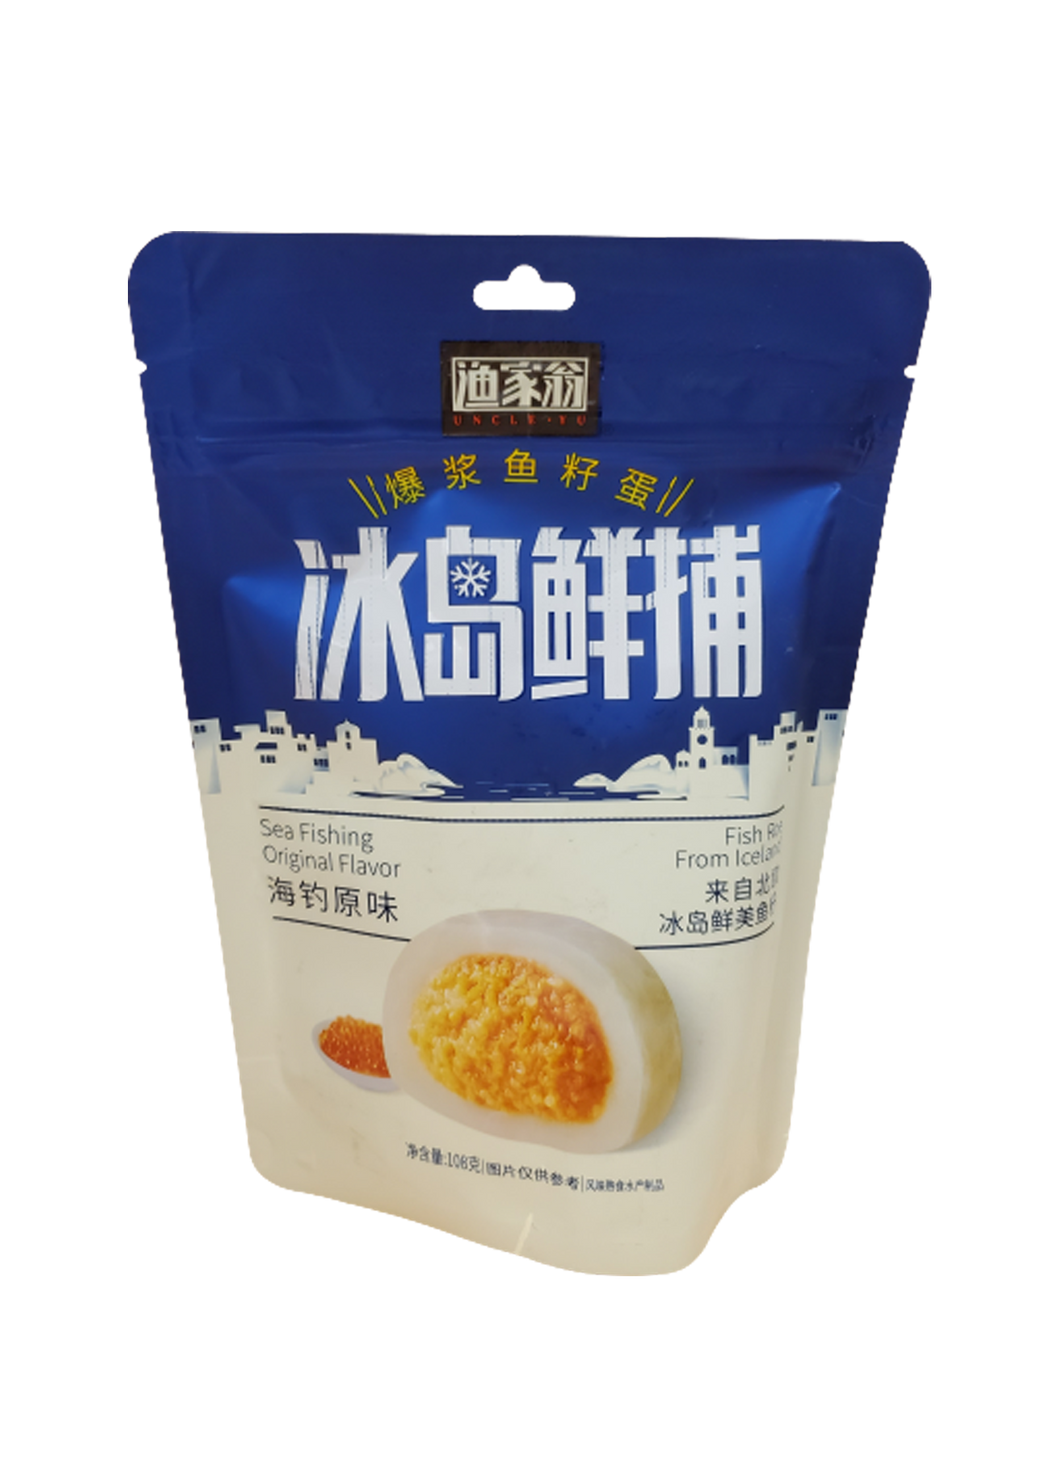 Sea Fishing Original Flavor Fish Roe from Iceland 108g